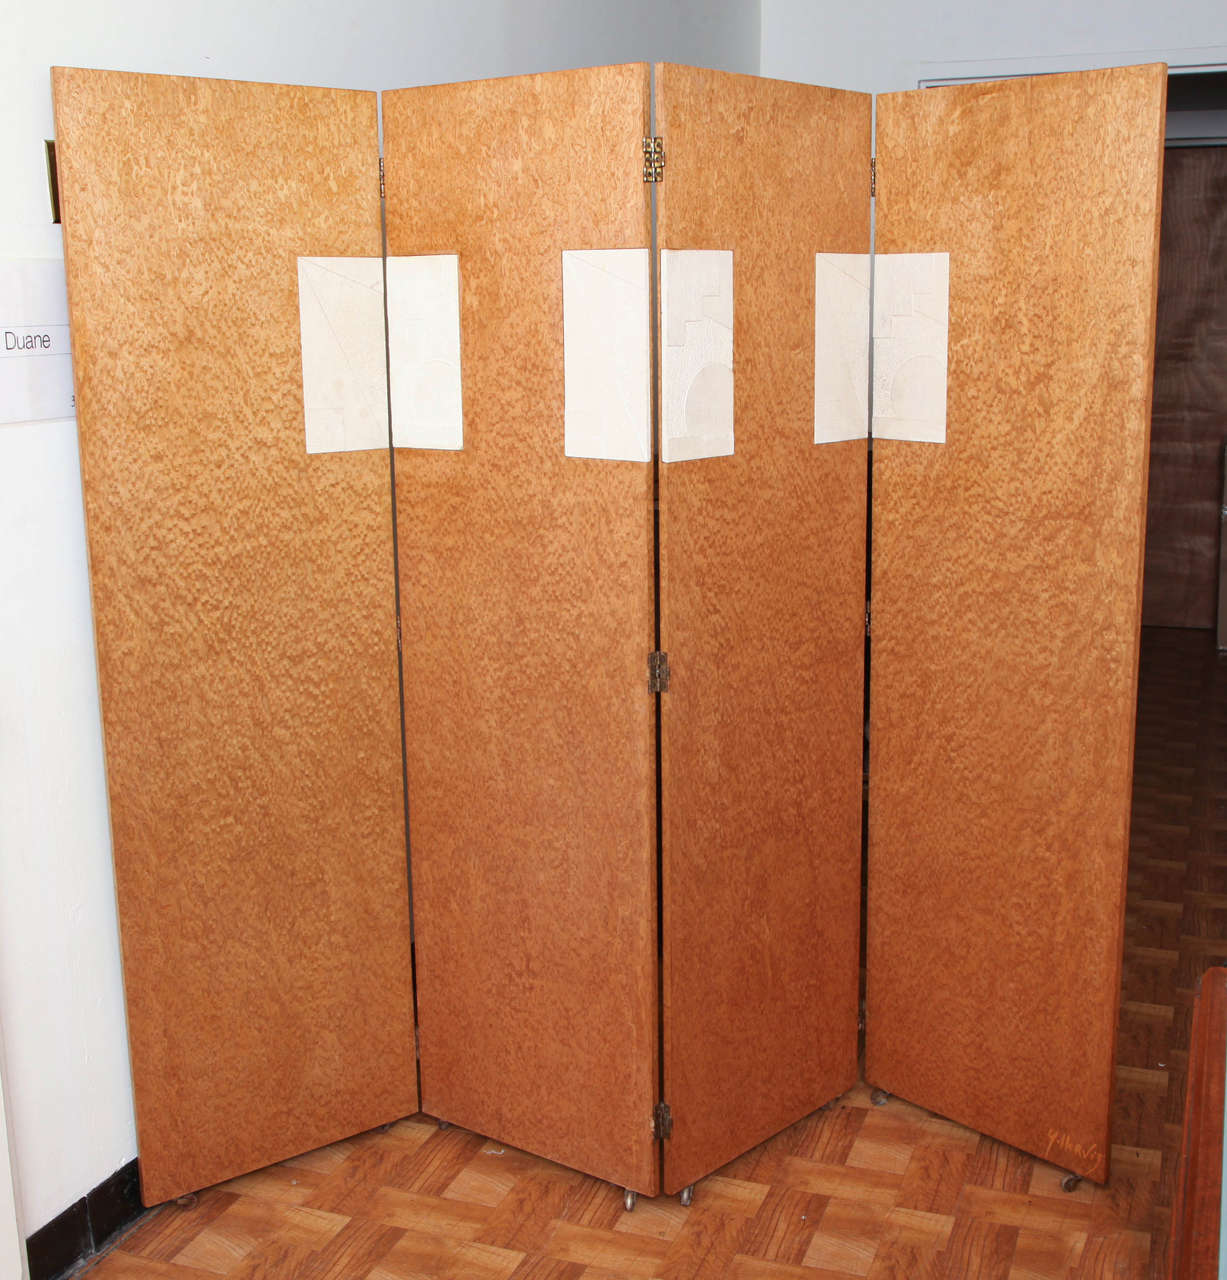 Four-panel burl sycamore screen with plaster insets by Yves Hervis.